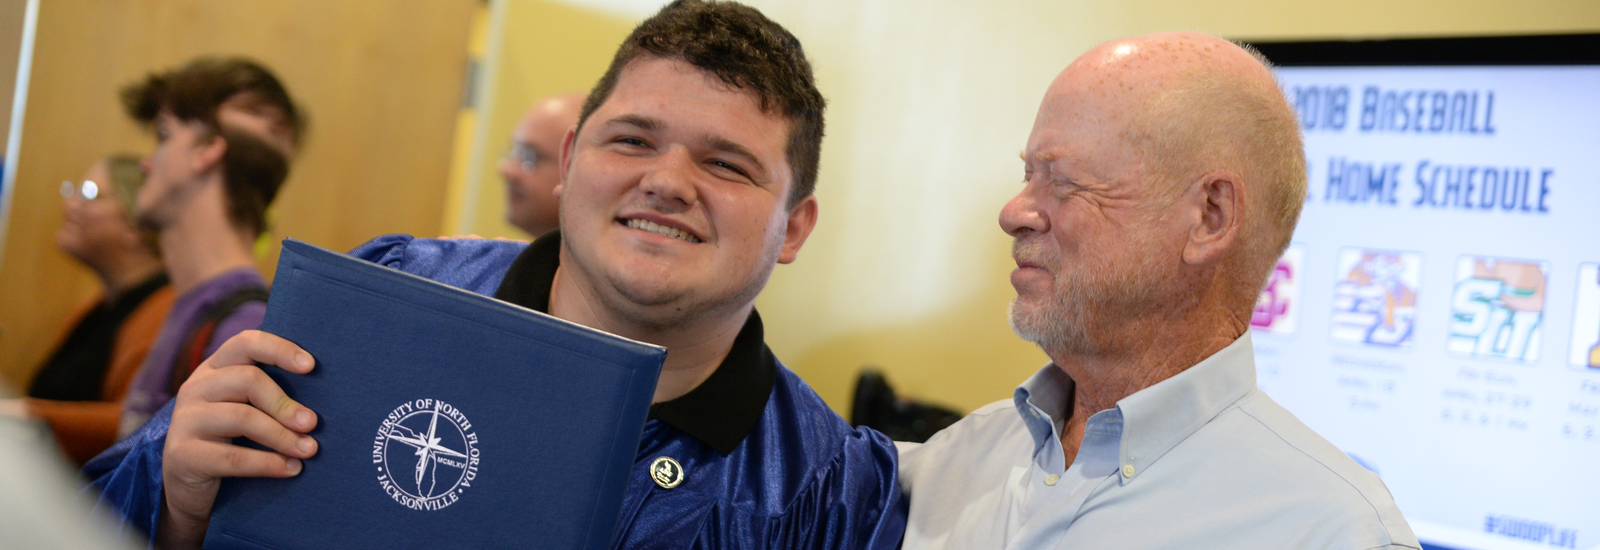 Male student in a UNF graduation gown holding a UNF diploma and standing by his dad